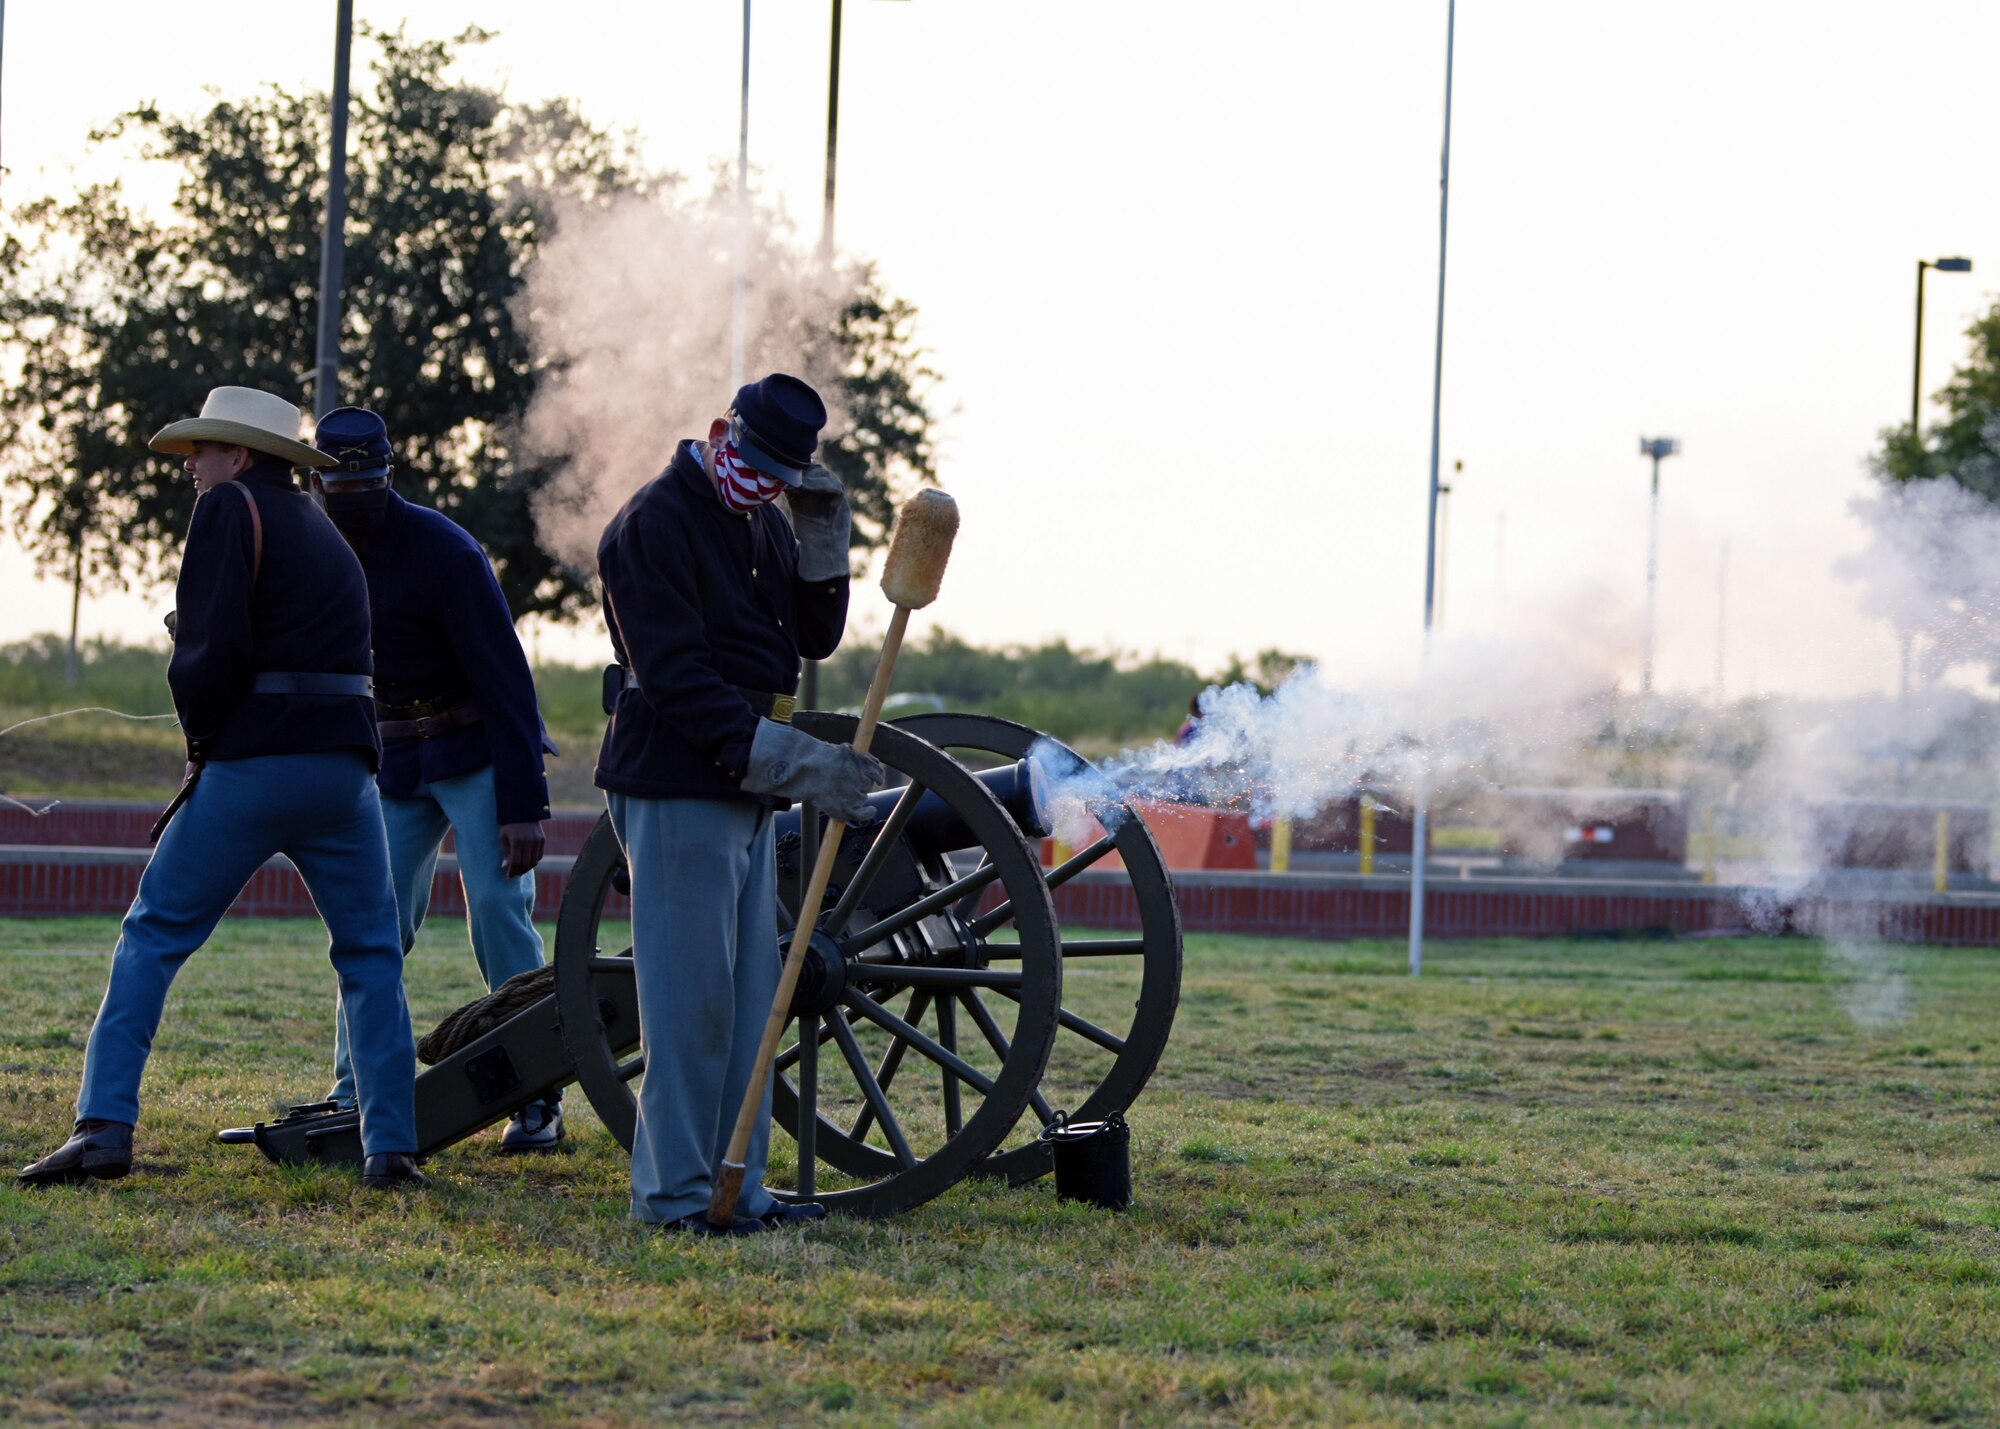 Fort Concho National Historic Landmark re-enactors and Buffalo Soldier volunteer fire a howitzer during the Air Force Birthday Celebration on the Parade Field at Goodfellow Air Force Base, Texas, Sept. 18, 2020. The re-enactors and volunteers helped to demonstrate the role of the Buffalo Soldier’s in supporting the westward expansion of the nation. (U.S. Air Force photo by Airman 1st Class Ethan Sherwood)